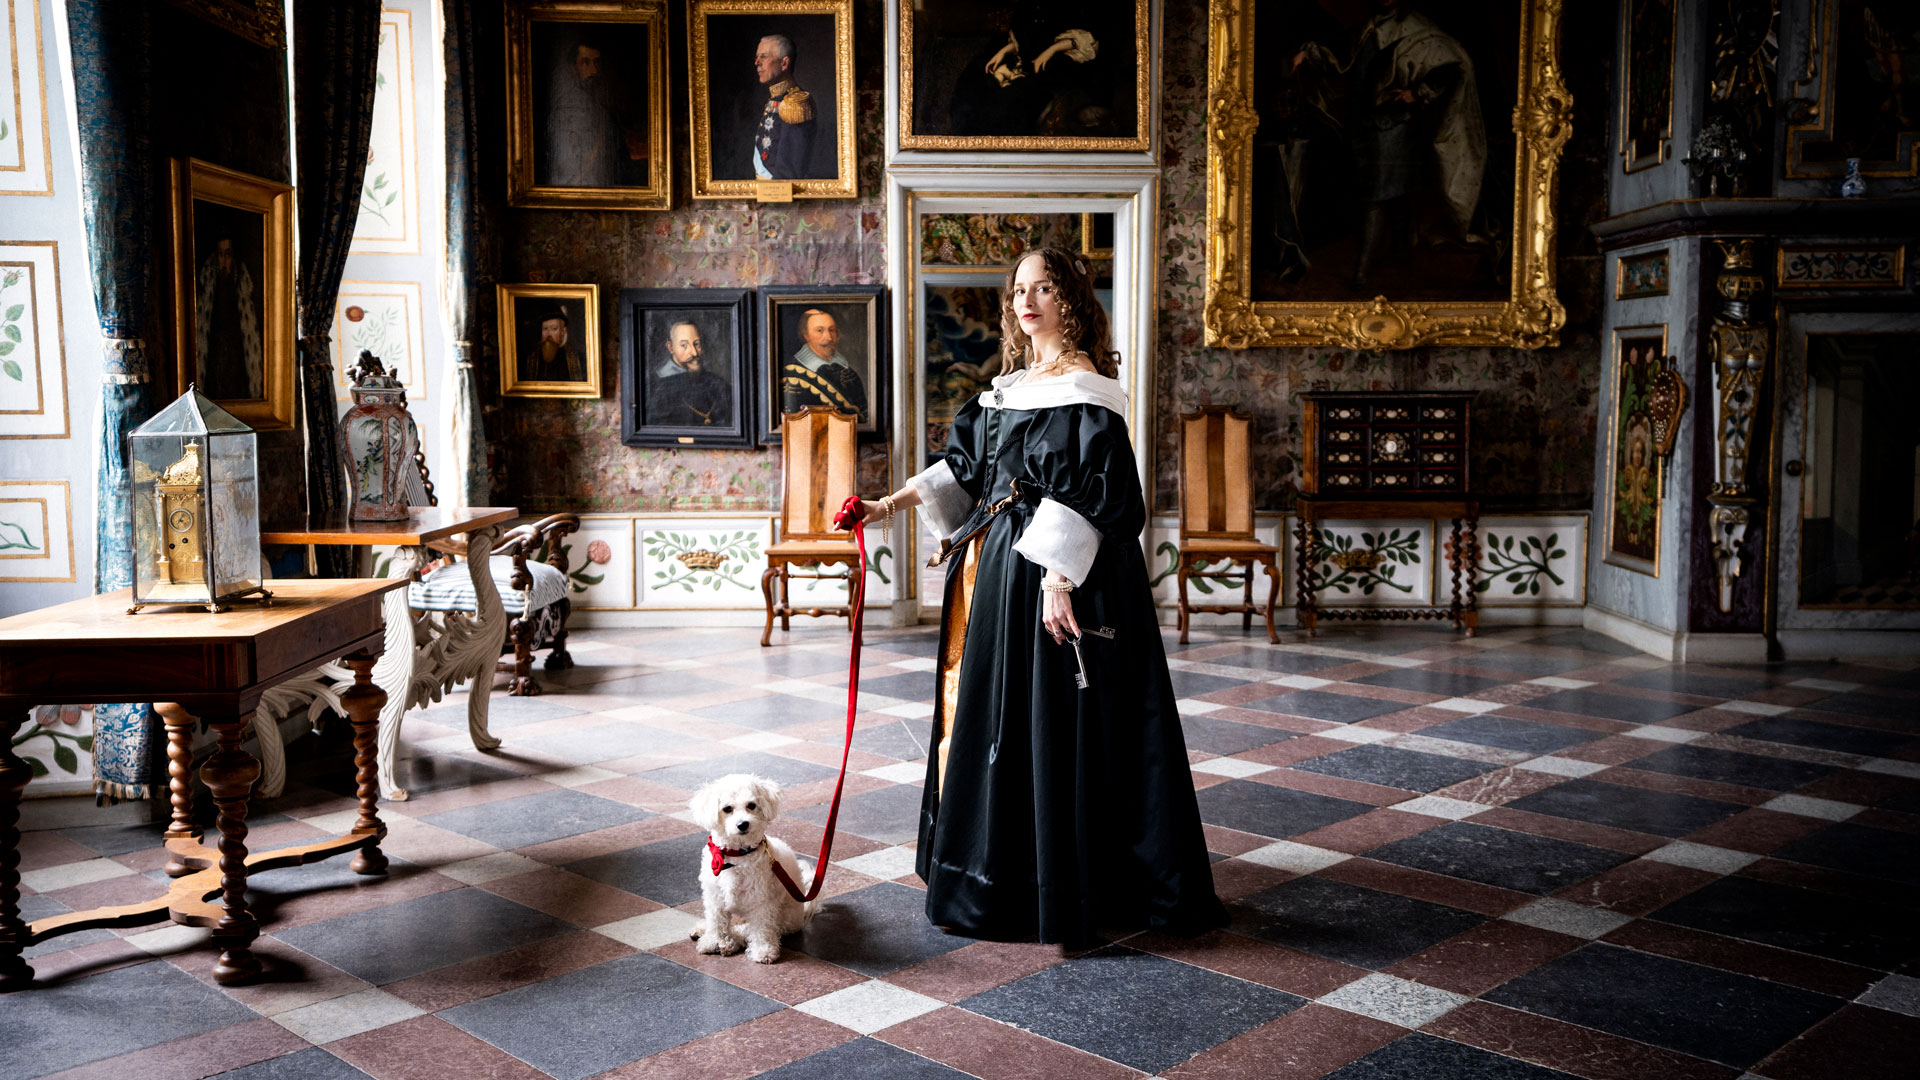 Woman dressed as a castle lady stands in the King's Hall with a small white dog on a red leash.